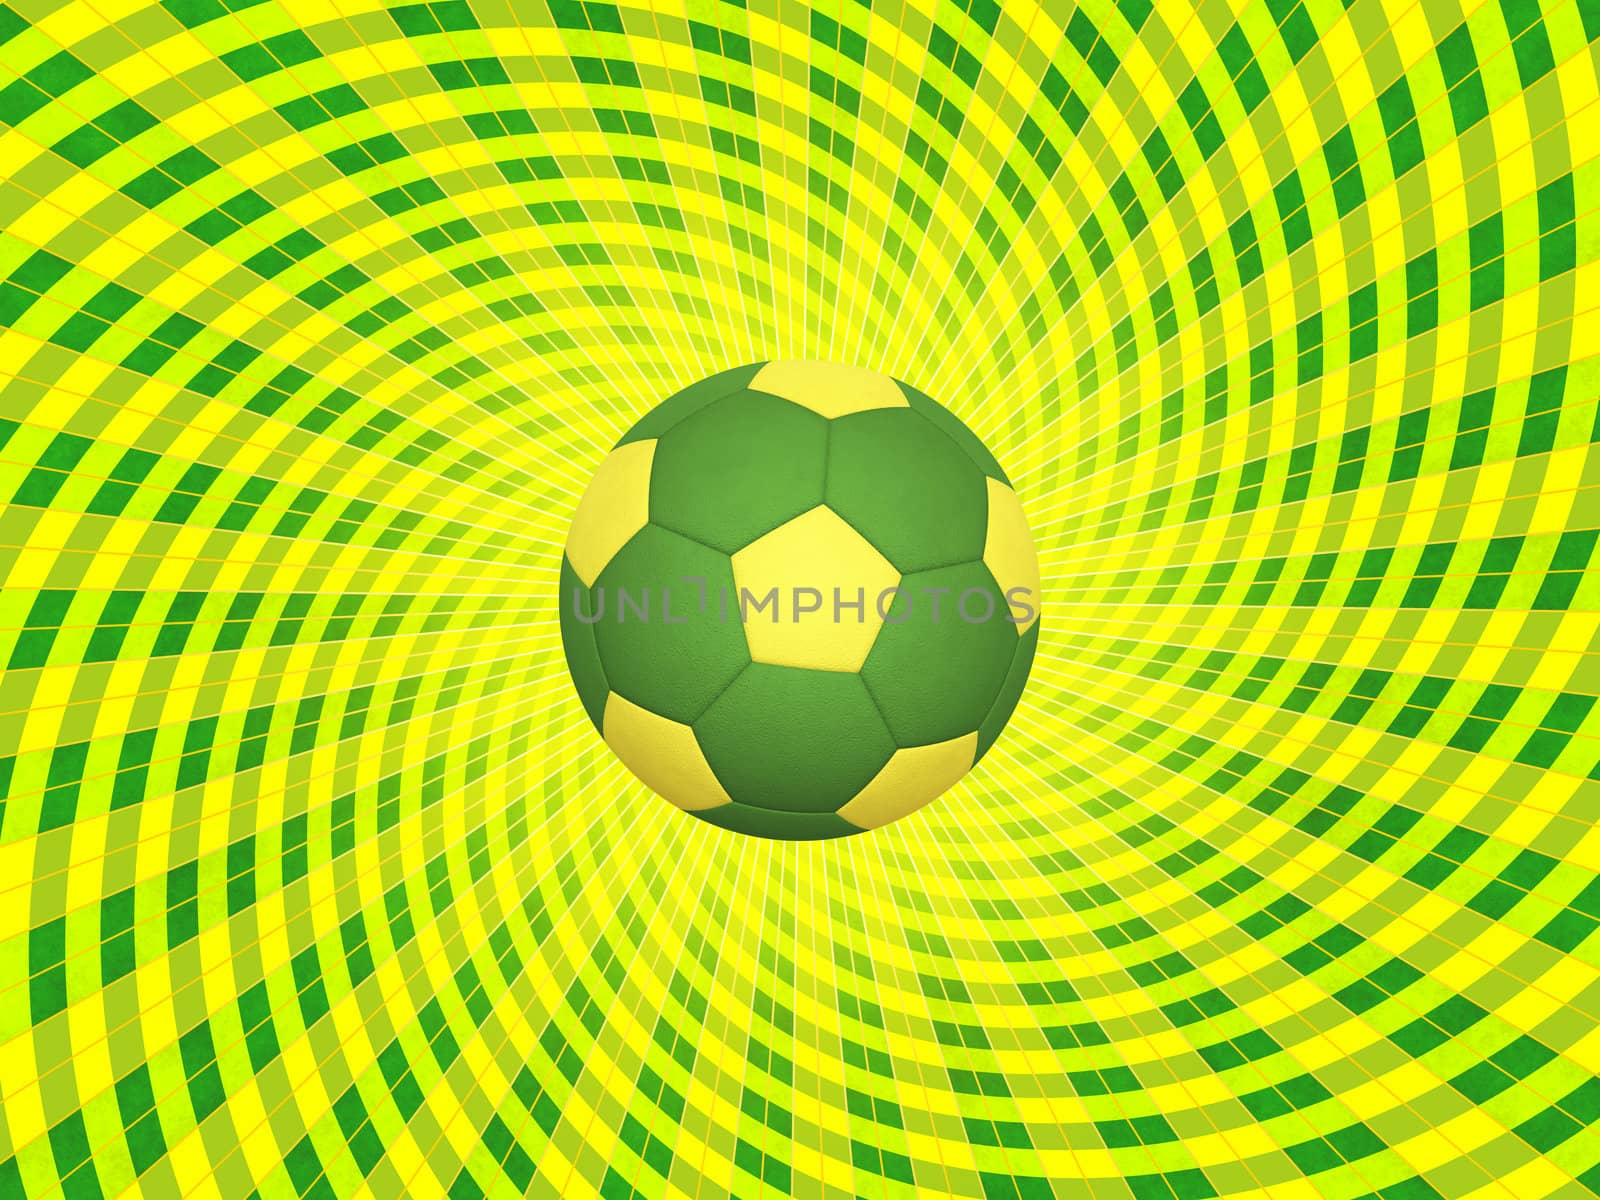 Soccer Ball With Colors of Brazil Over Striped Dynamic Background - Realistic 3D Illustration